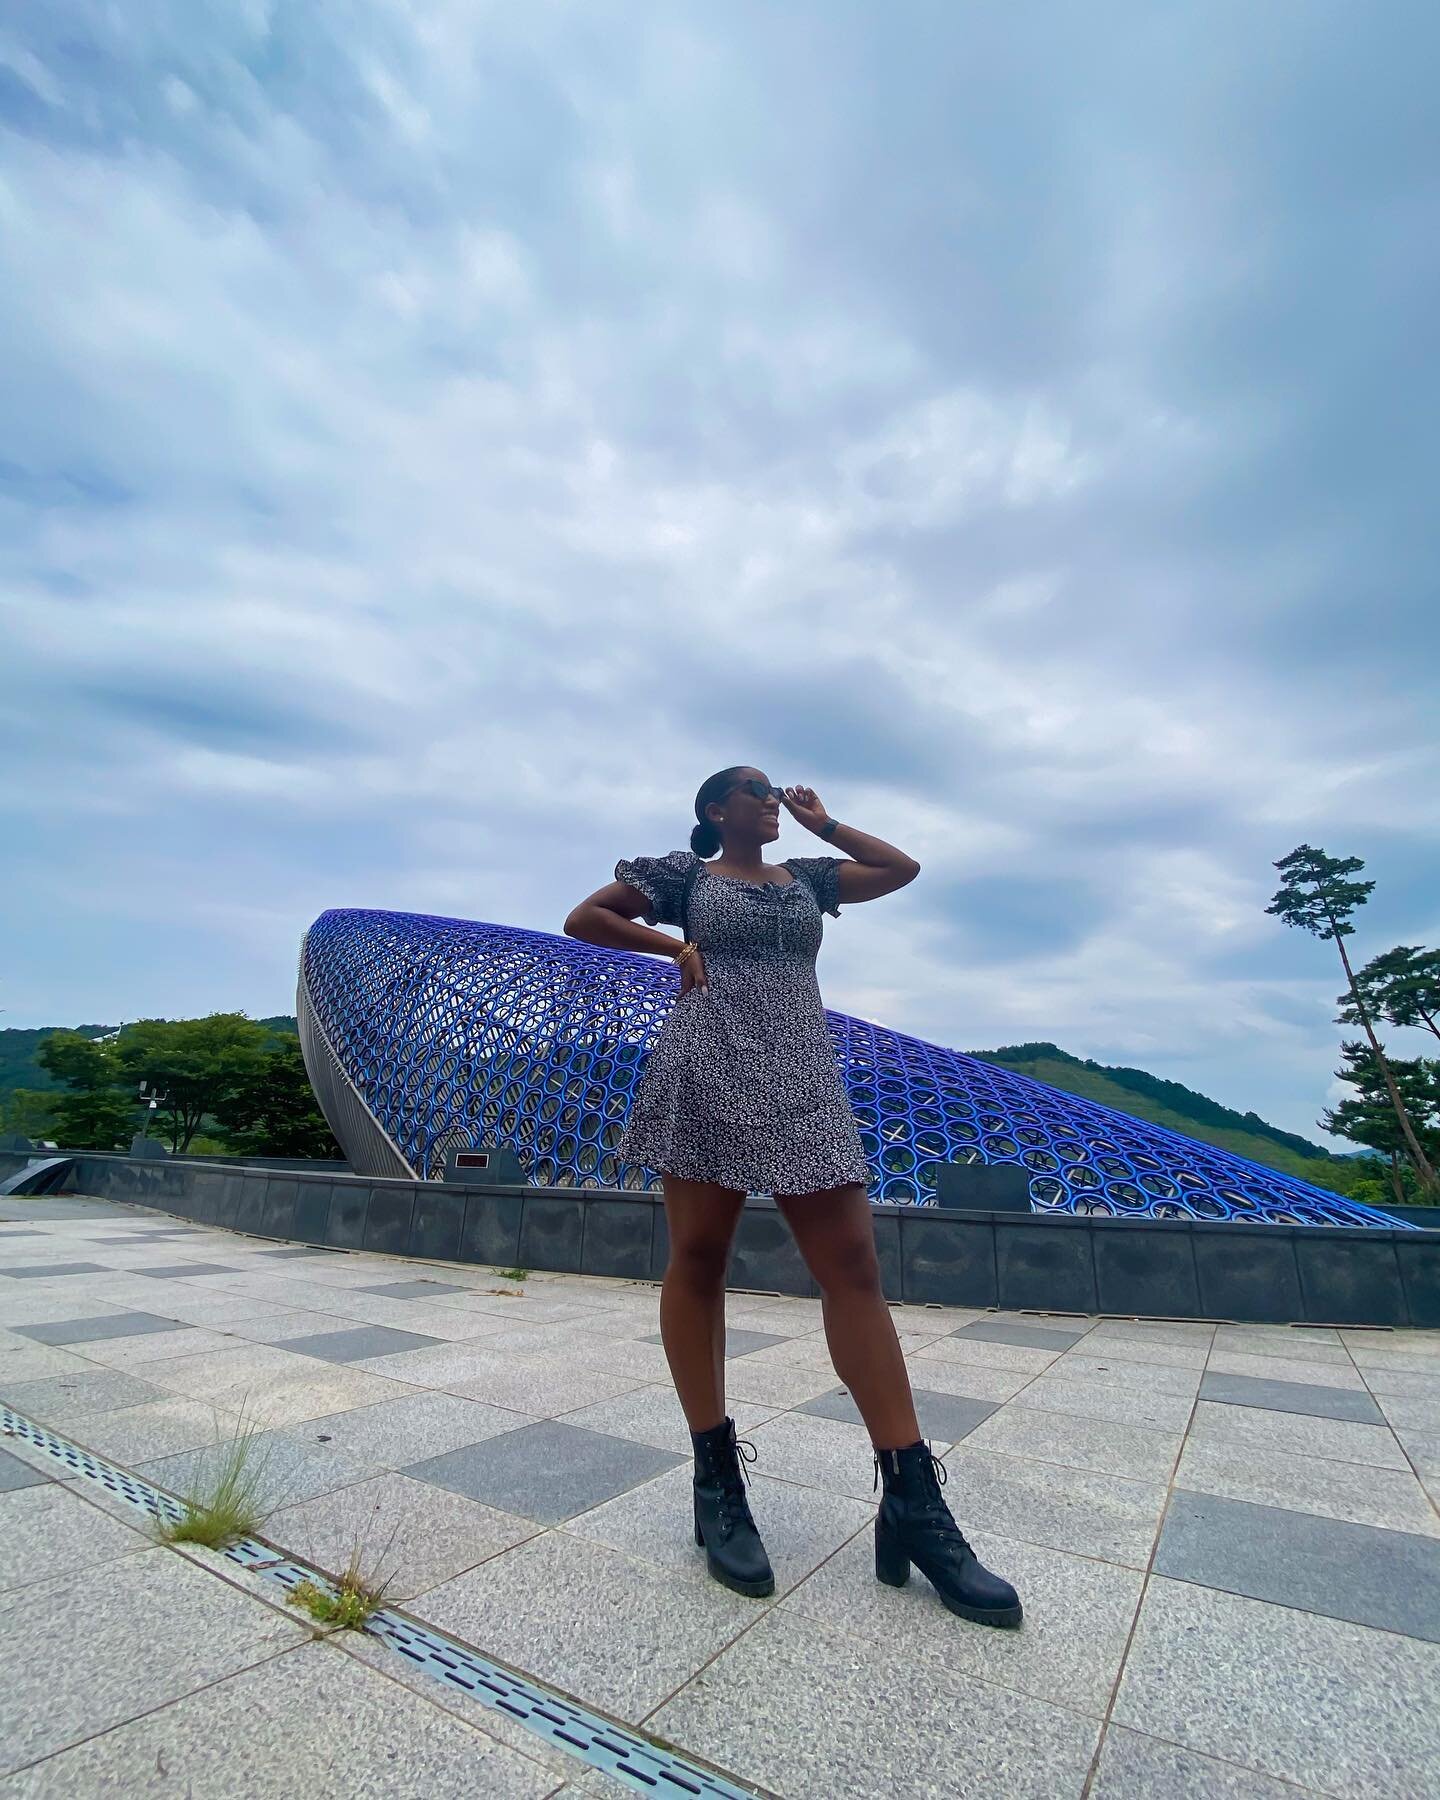 You can&rsquo;t tell me I&rsquo;m not 6ft 😎.
&bull;
Swipe for the shenanigans 😅
.
.
.
.
.
.
.
📸: @livingmylexlifee 
#kennyinkorea #expat #expatlife #expatstories #lifeabroad #blackgirlmagic #blackgirlswhoblog #brownskin #brownskingirls #blackgirlb